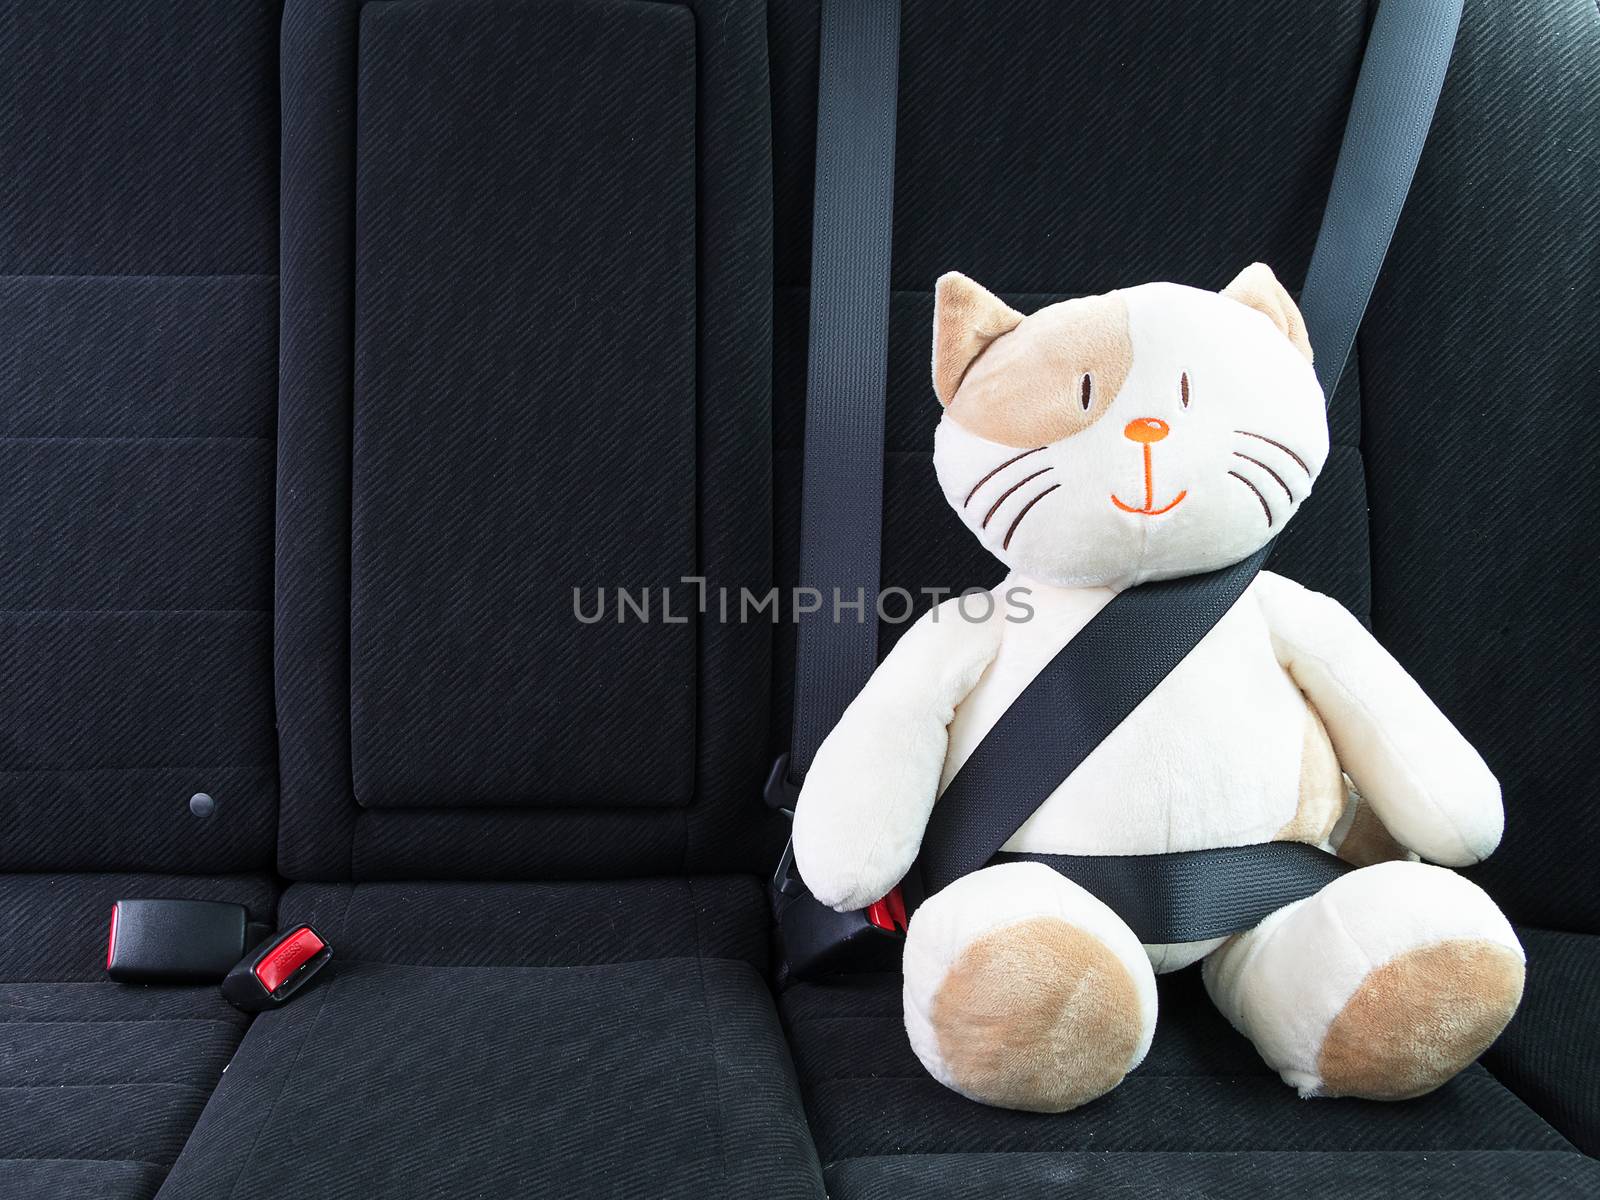 Plush toy cat strapped in with seat belt in back seat of car. Safety on the road. Protection concept.